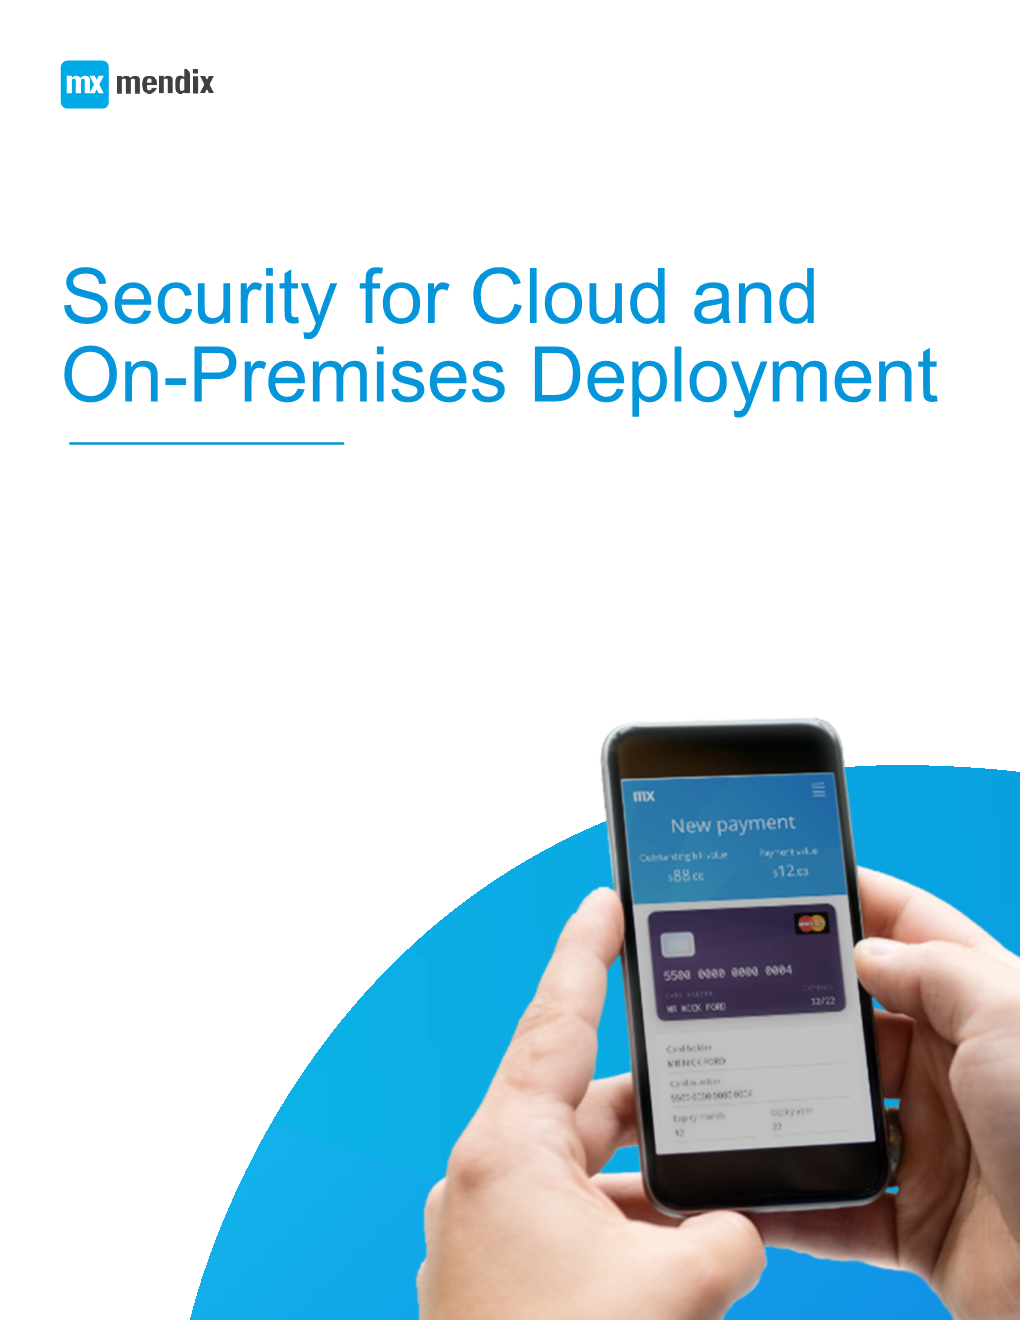 Security for Cloud and On-Premises Deployment